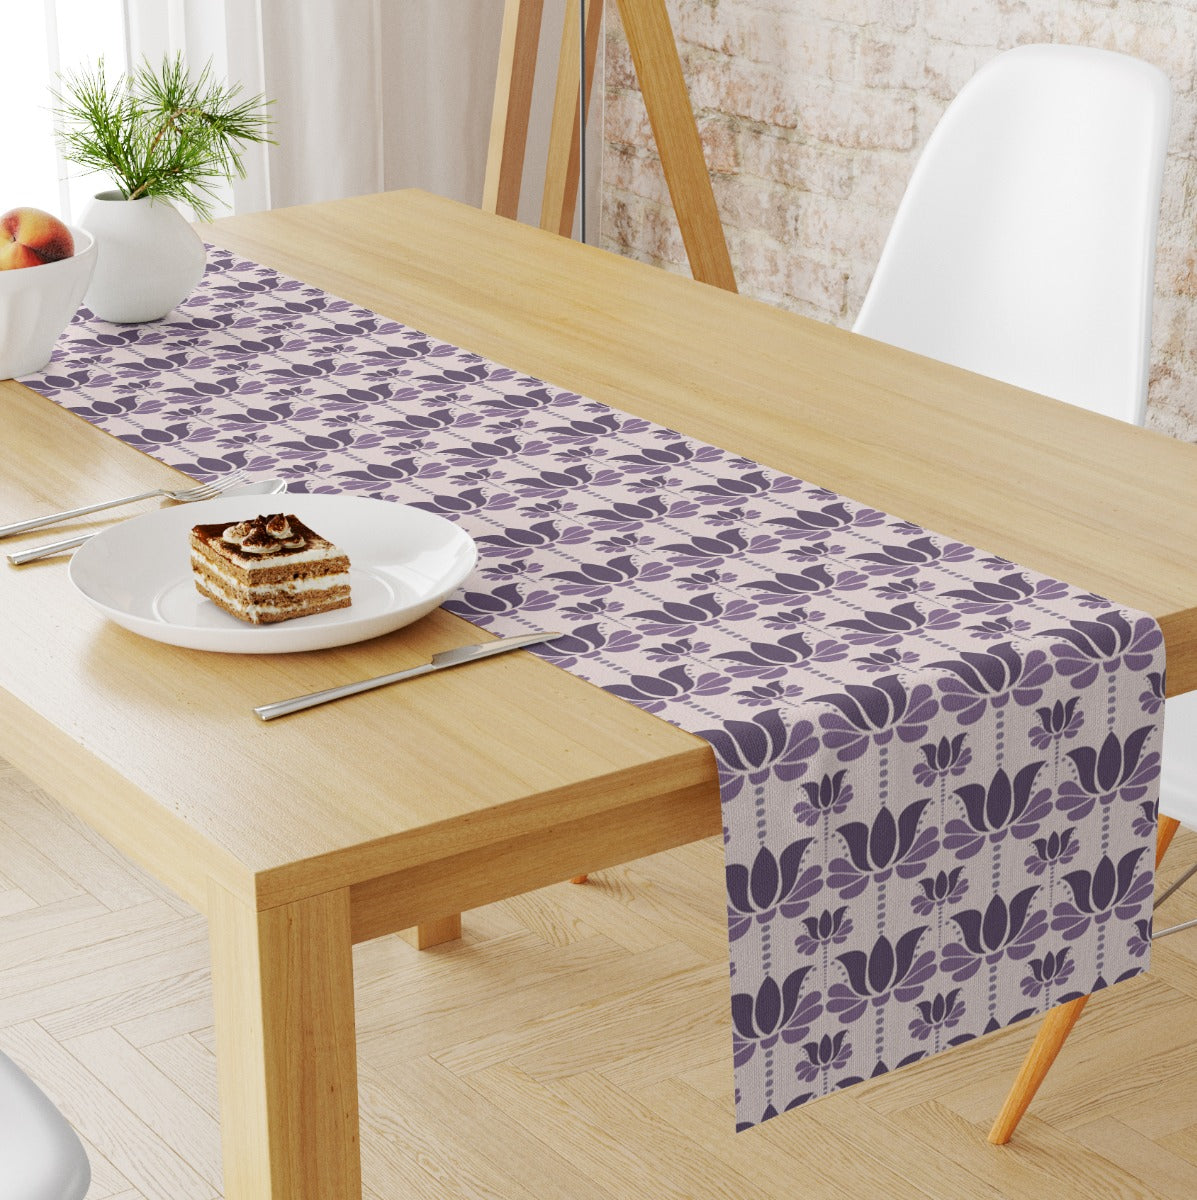 Lotus Sequence Table Runner